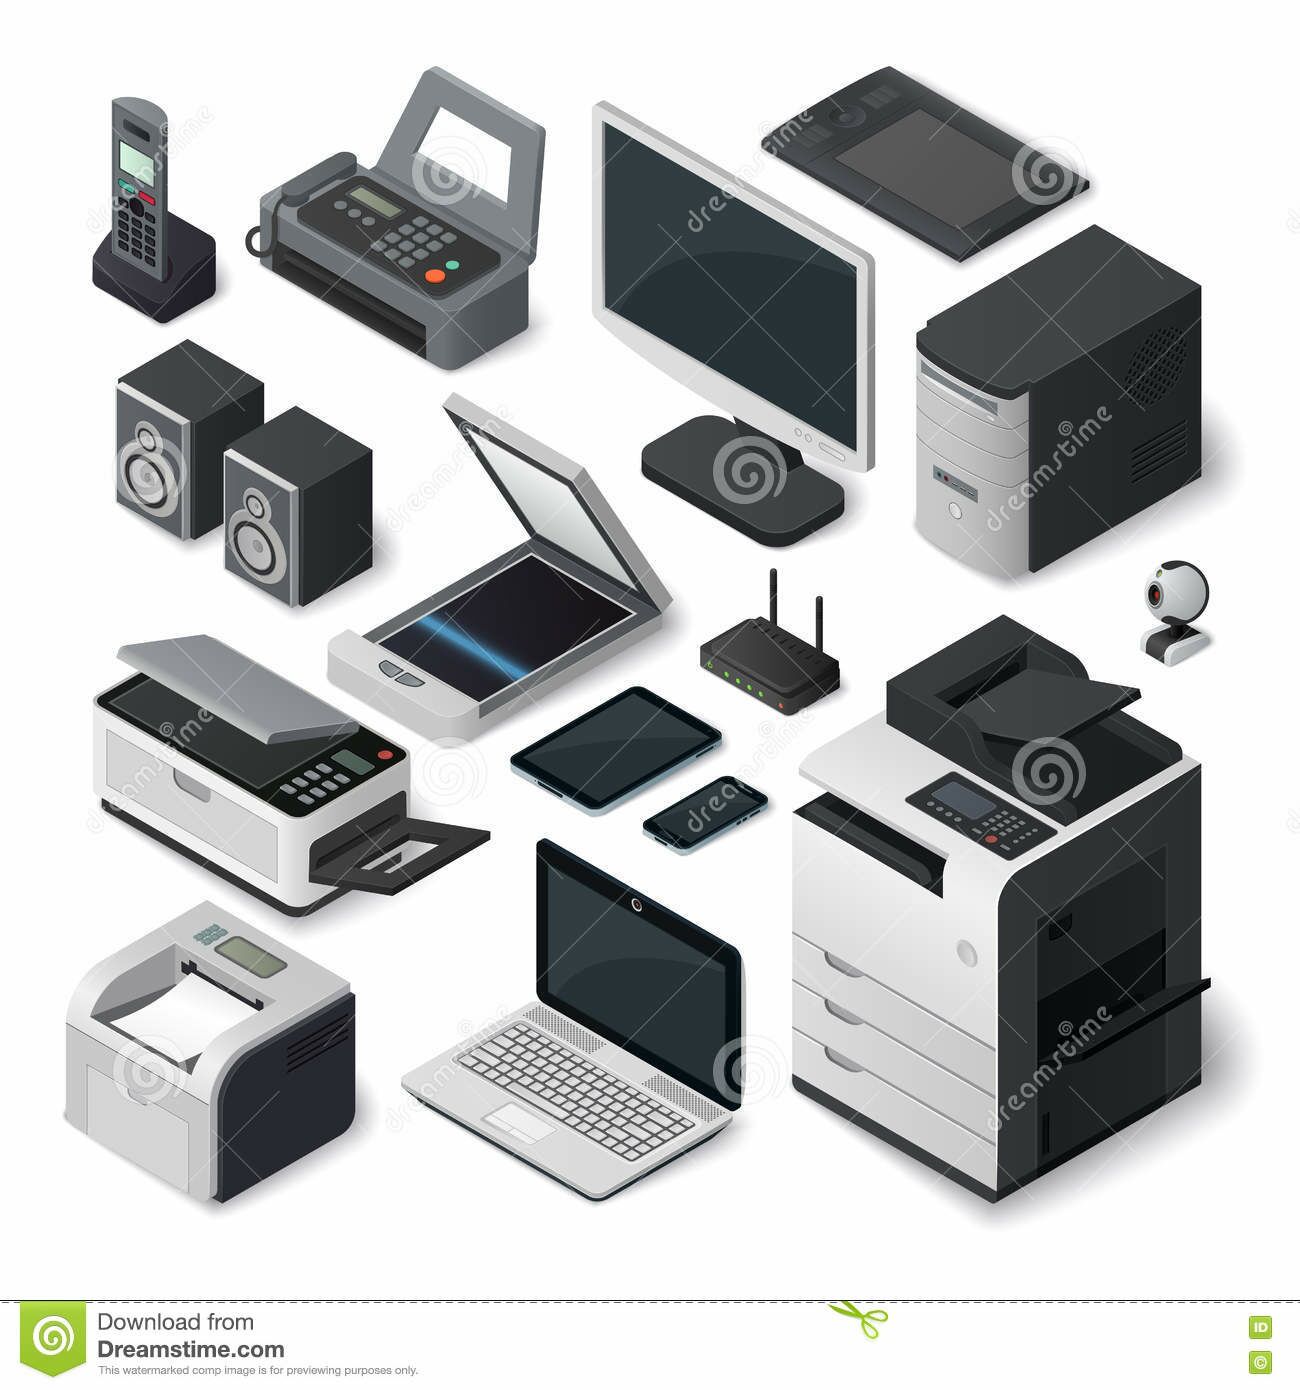 #Office Electronic